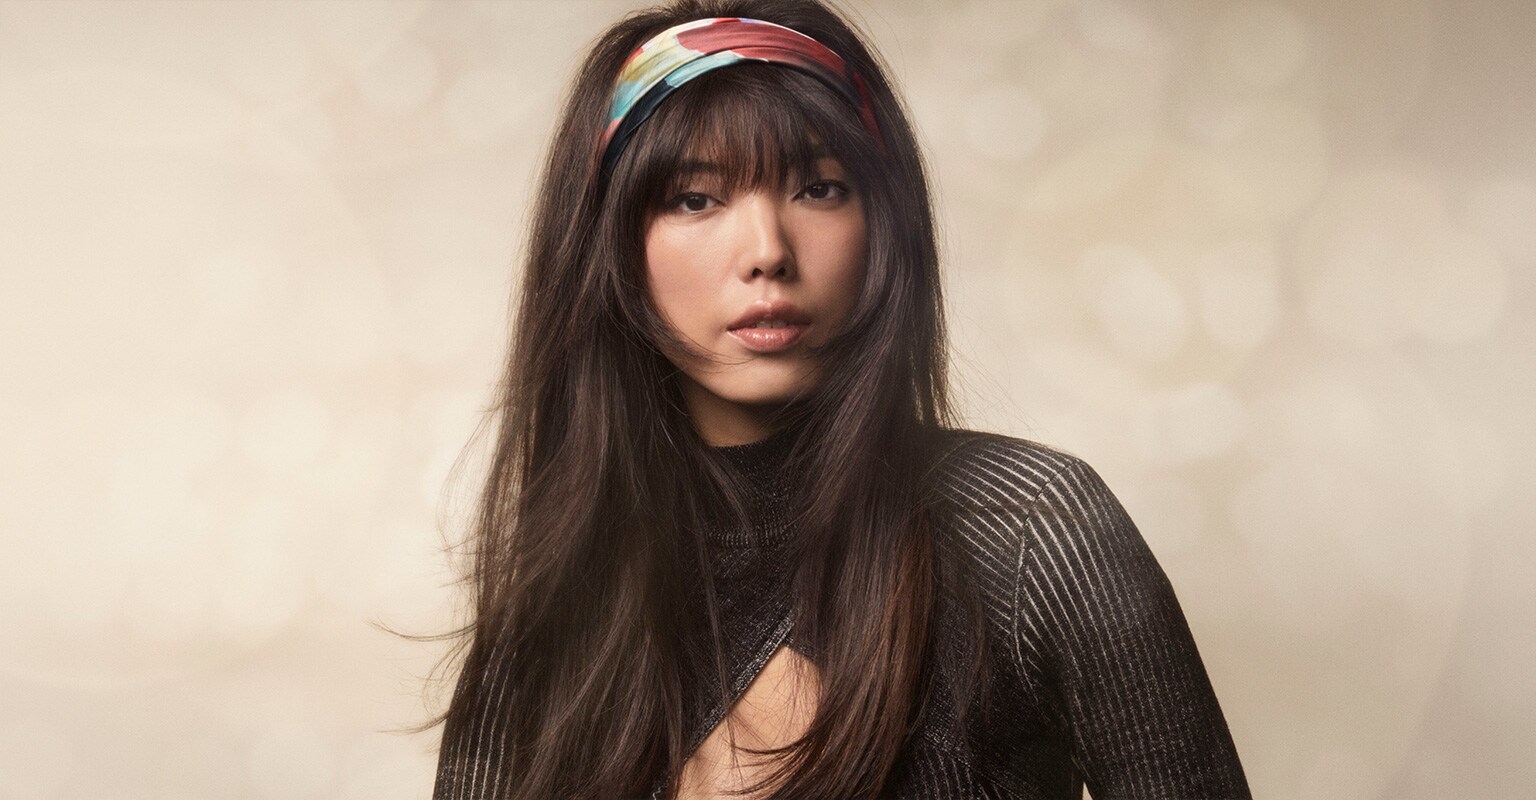 Shop Aveda limited-edition holiday gift sets in partnership with fashion designer Phillip Lim